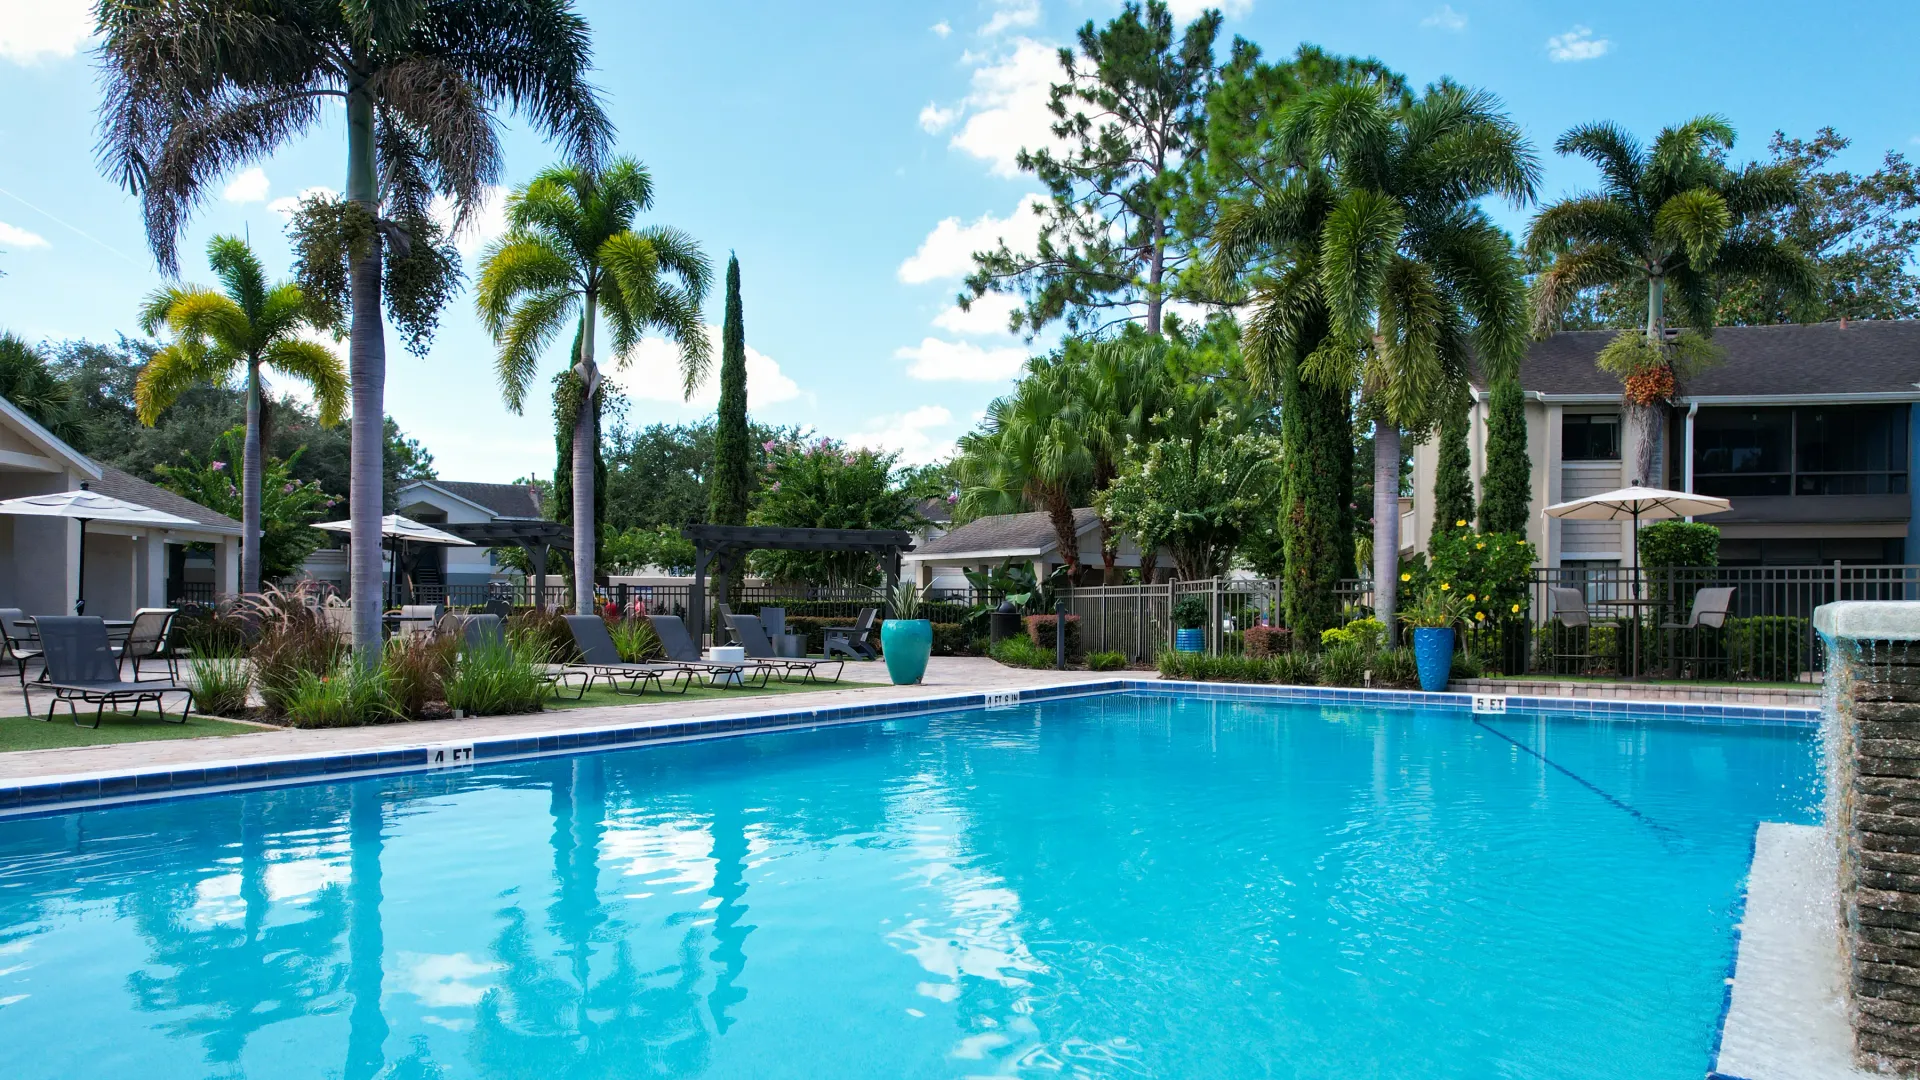 Resort-style pool at Harper Grand Apartments with palm trees, lounge chairs, and umbrellas, providing a serene and relaxing atmosphere.